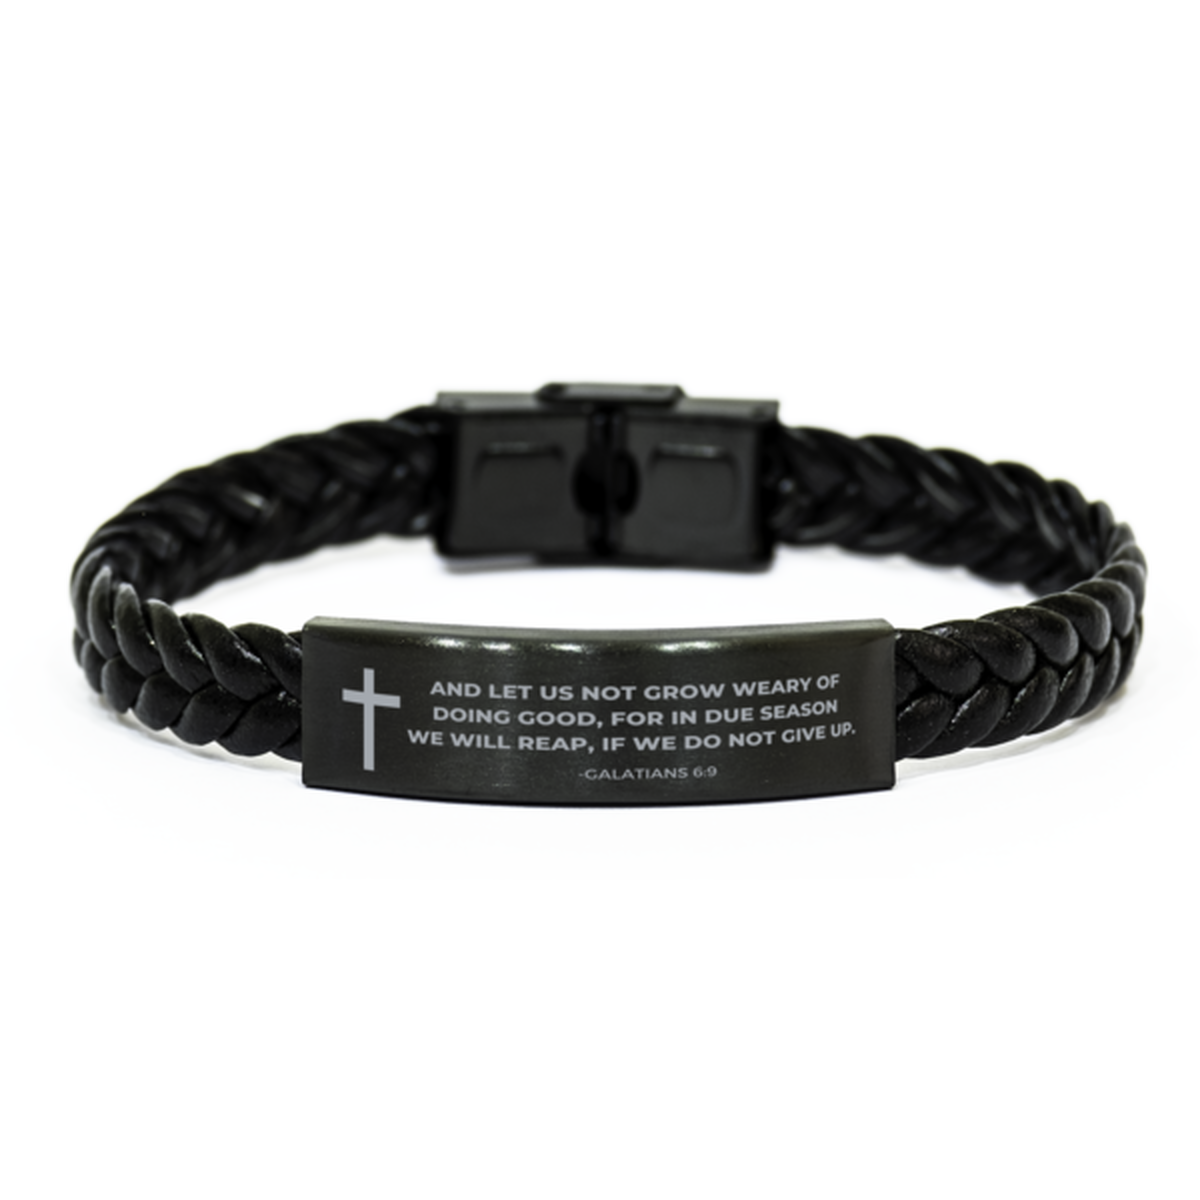 Baptism Gifts For Teenage Boys Girls, Christian Bible Verse Braided Leather Bracelet, And let us not grow weary, Catholic Confirmation Gifts for Son, Godson, Grandson, Nephew